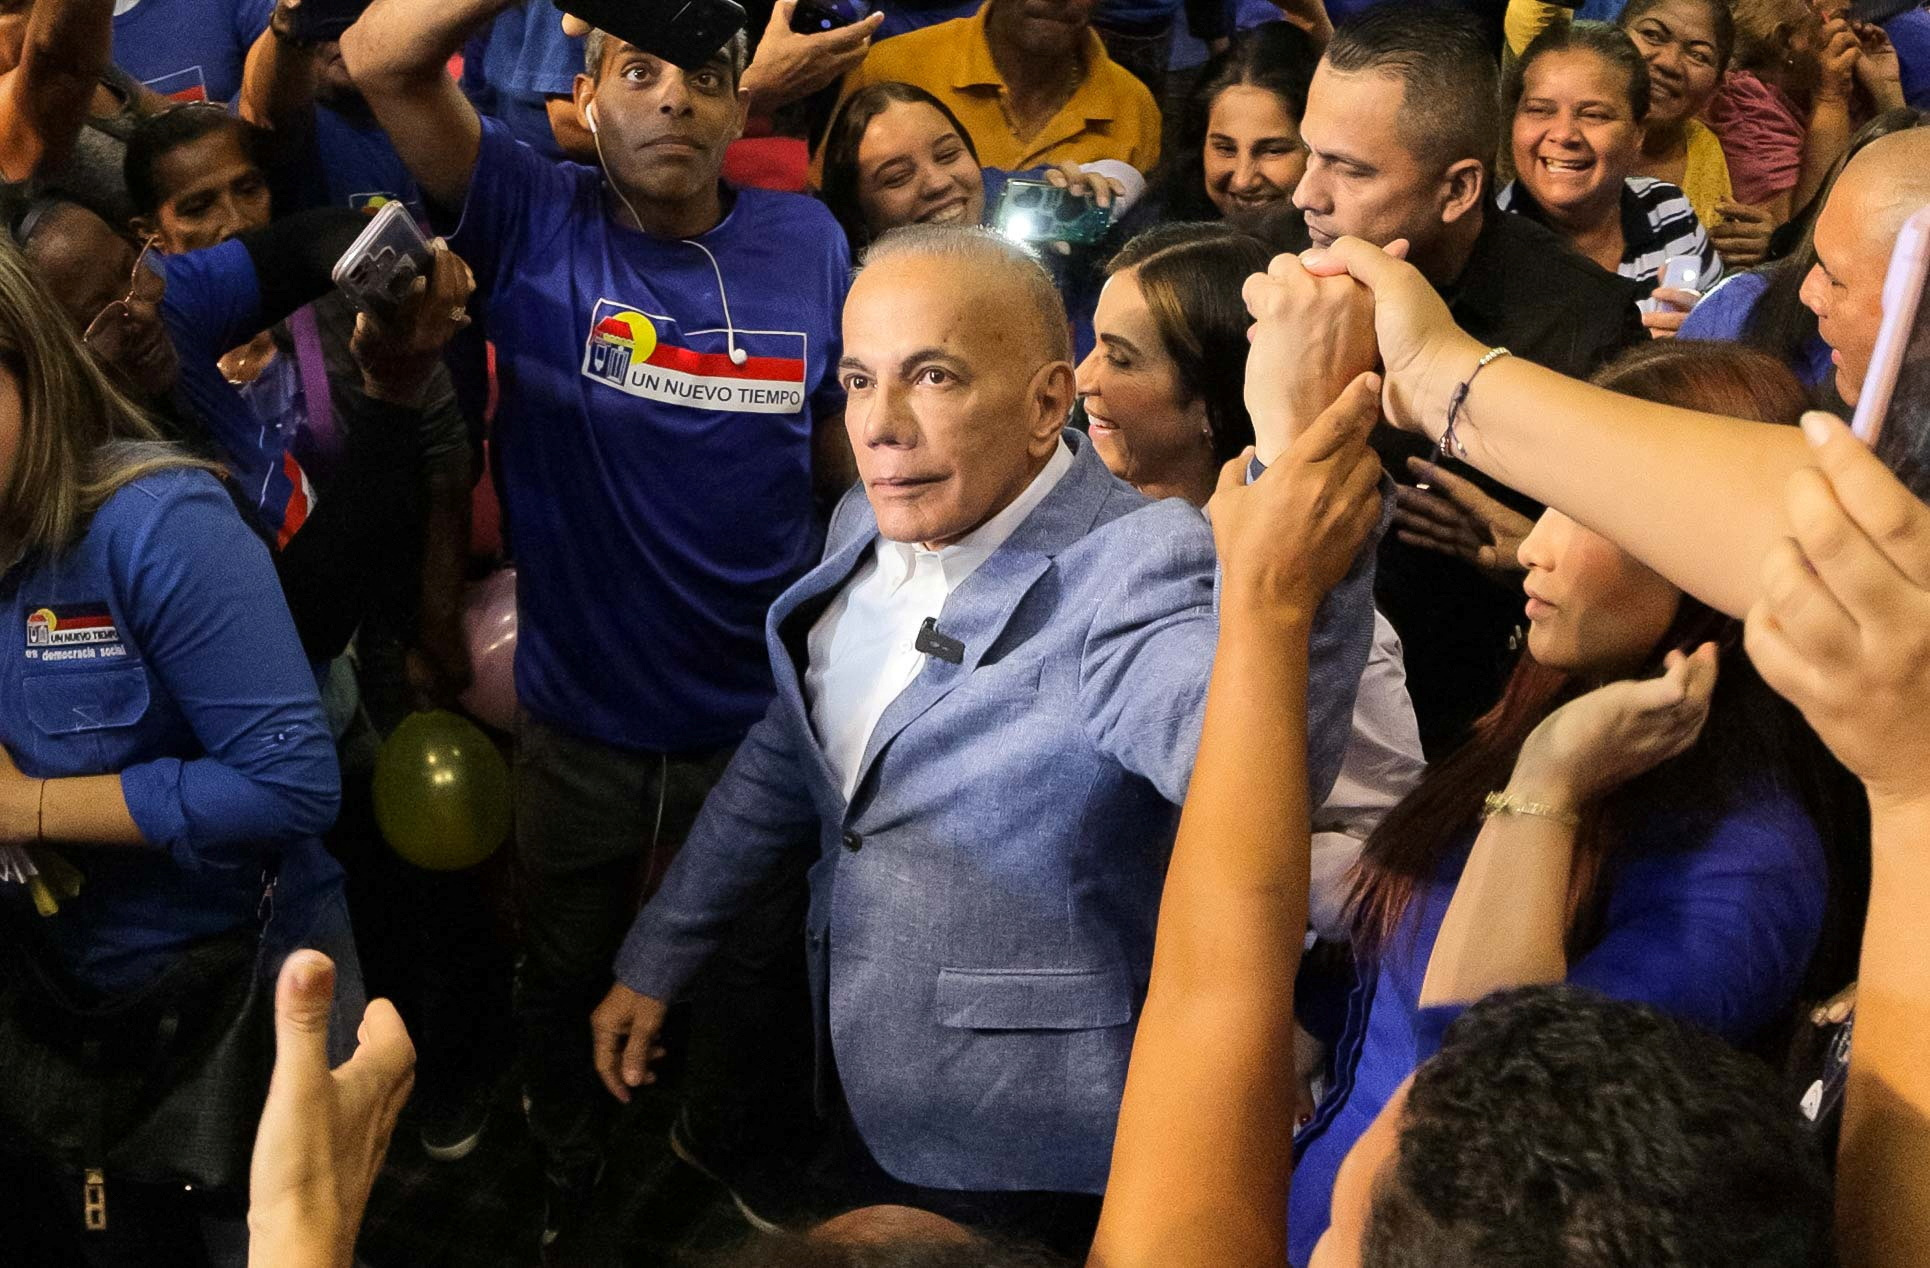 Venezuelan opposition candidate Manuel Rosales addresses supporters, in Maracaibo